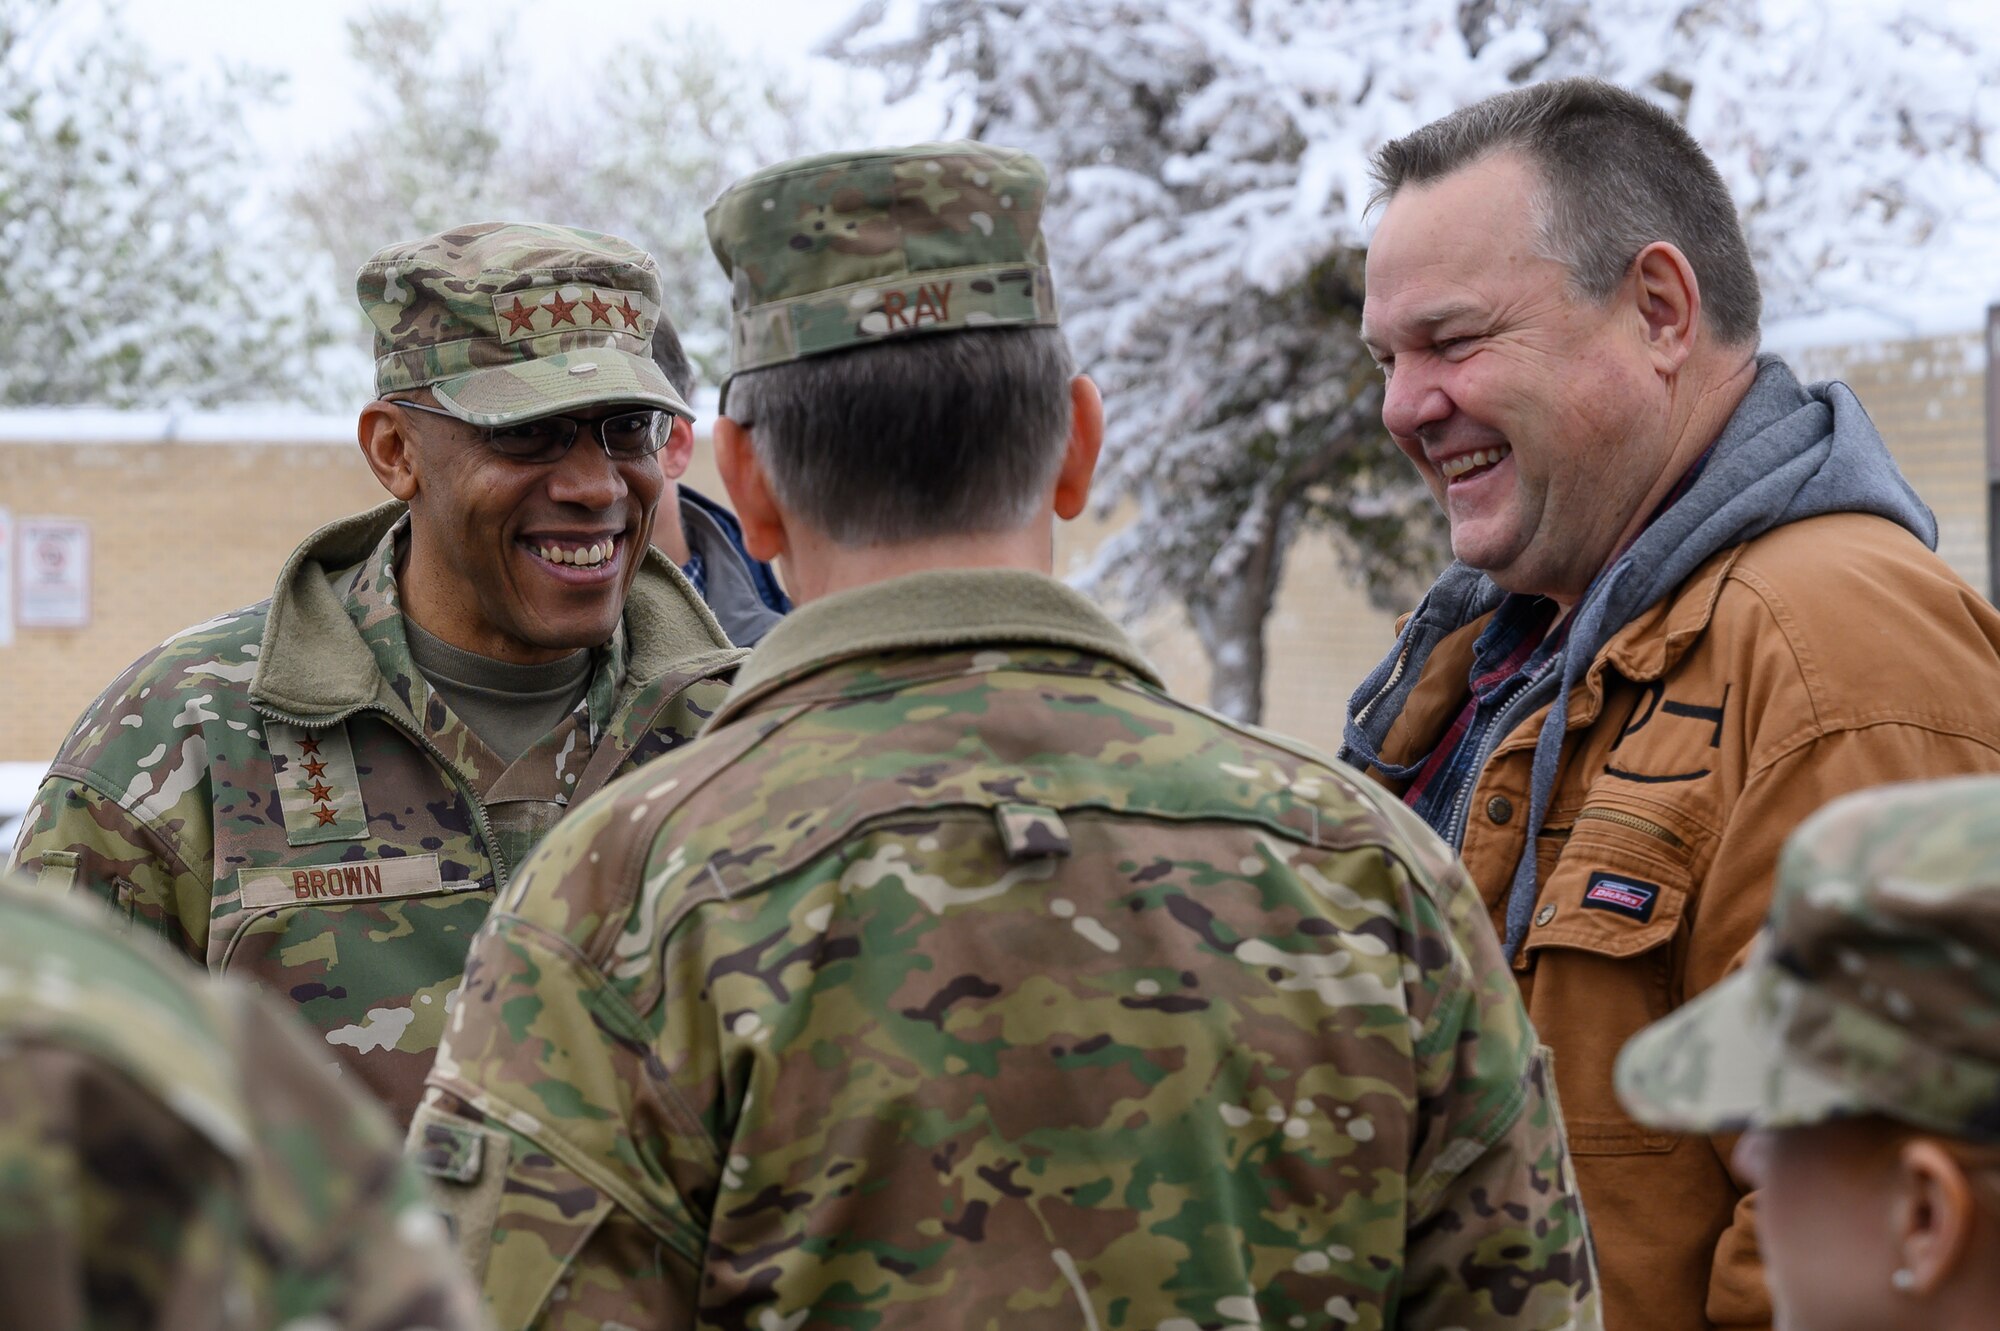 Air Force Chief of Staff Gen. CQ. Brown, Jr., left, U.S. Senator Jon Tester right, and Air Force Global Strike Commander Gen. Timothy M. Ray, make acquaintances May 21, 2021, at Malmstrom Air Force Base, Mont.